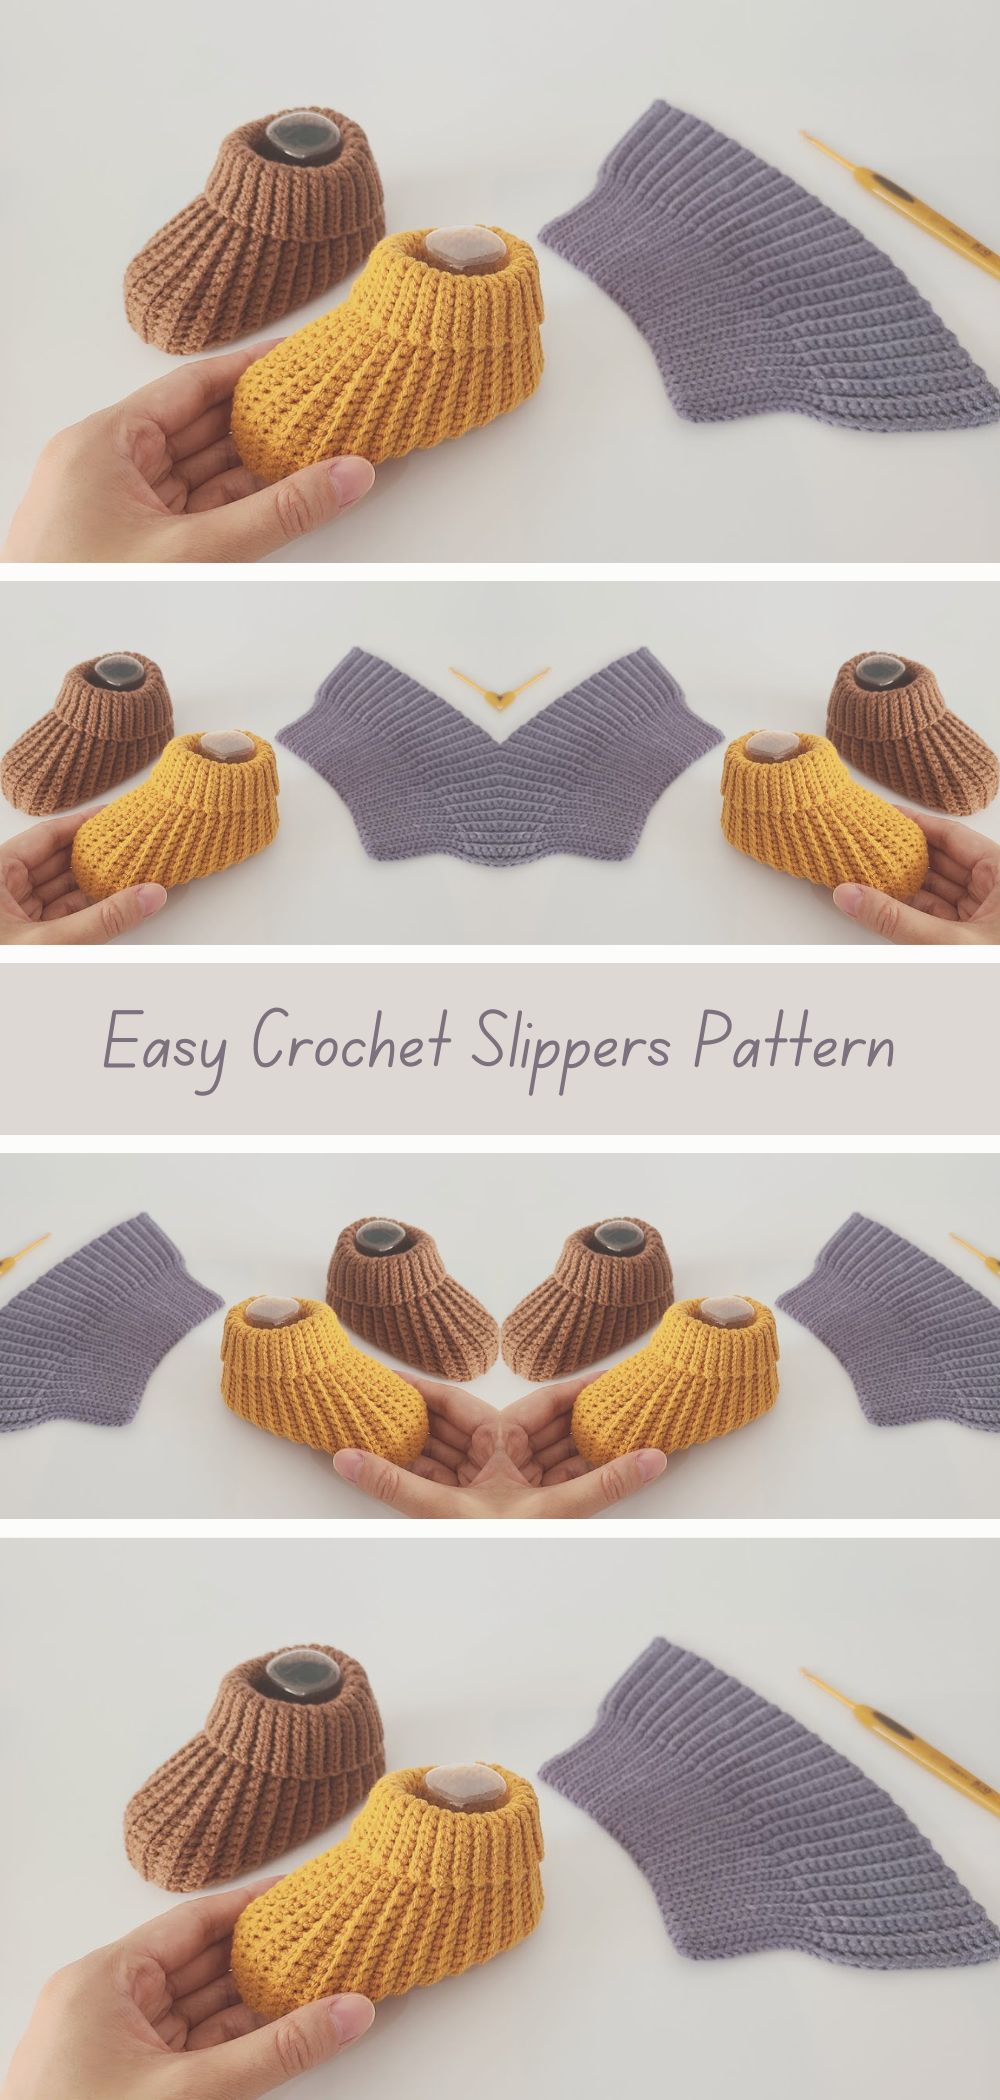 Easy Crochet Slippers Pattern - Create comfortable and stylish slippers with this beginner-friendly crochet pattern